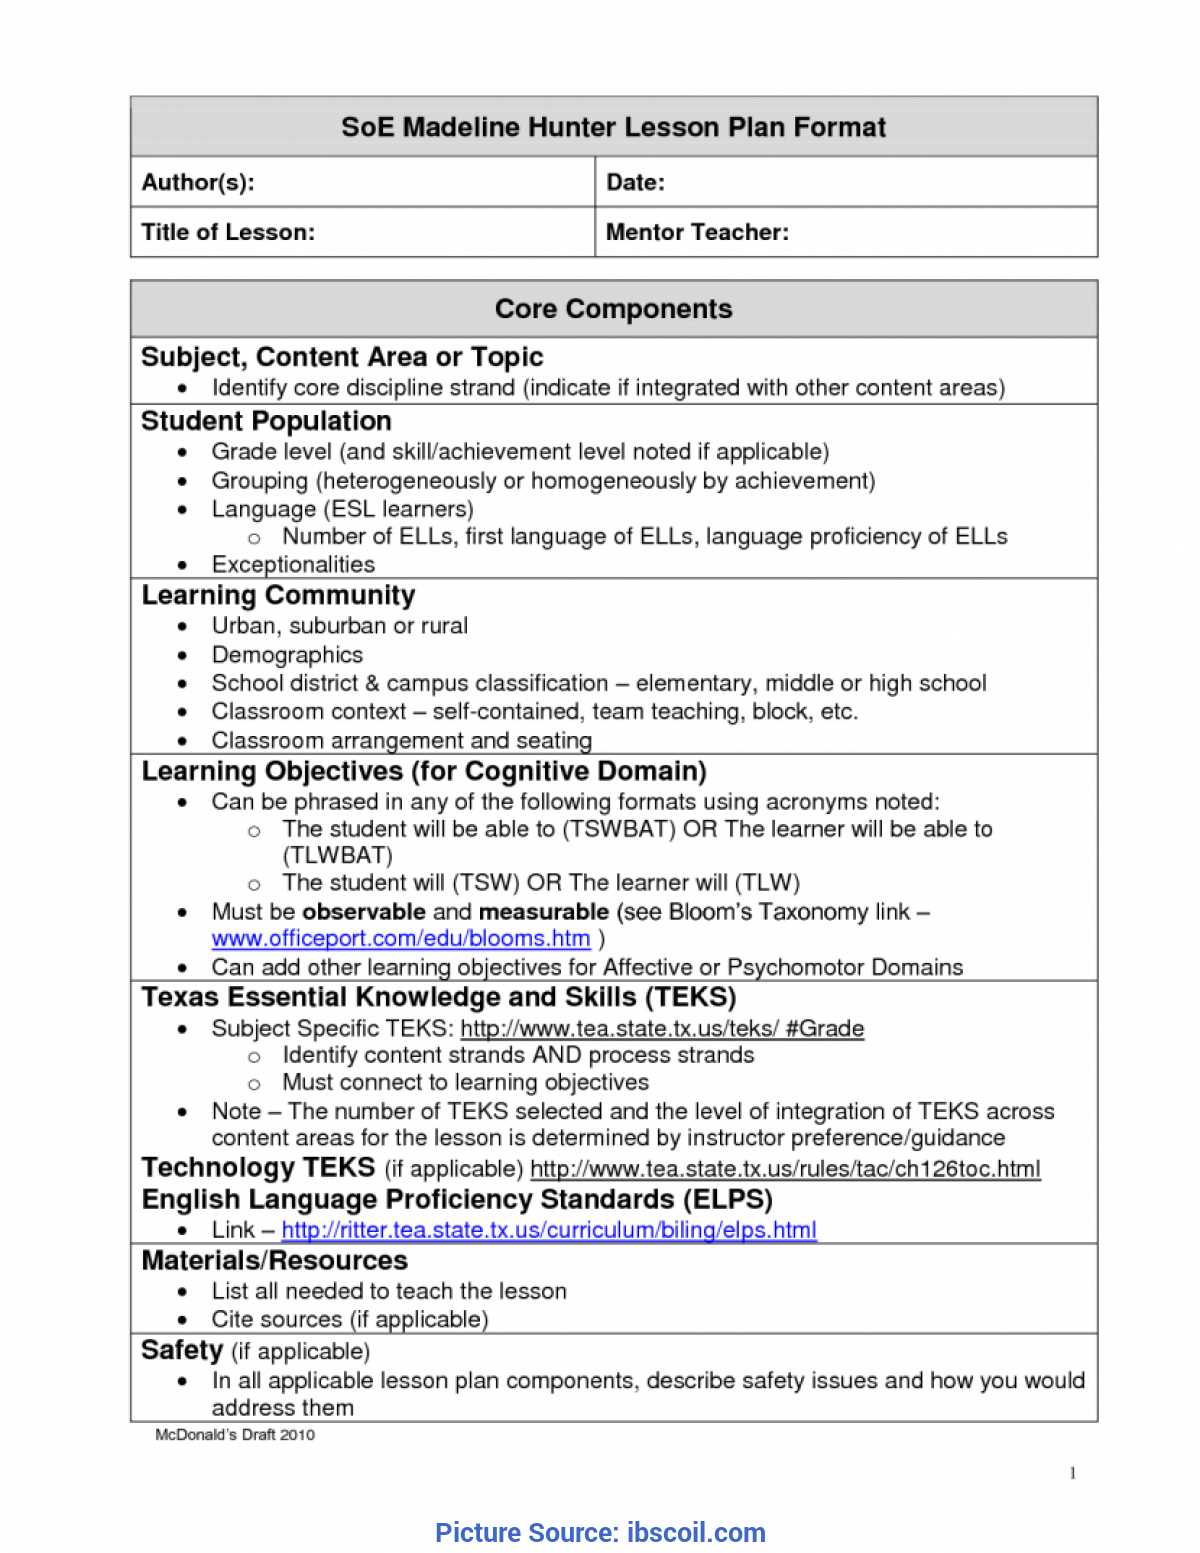 Madeline Hunter Lesson Plan Template Twiroo Com | Lesso Regarding Madeline Hunter Lesson Plan Blank Template